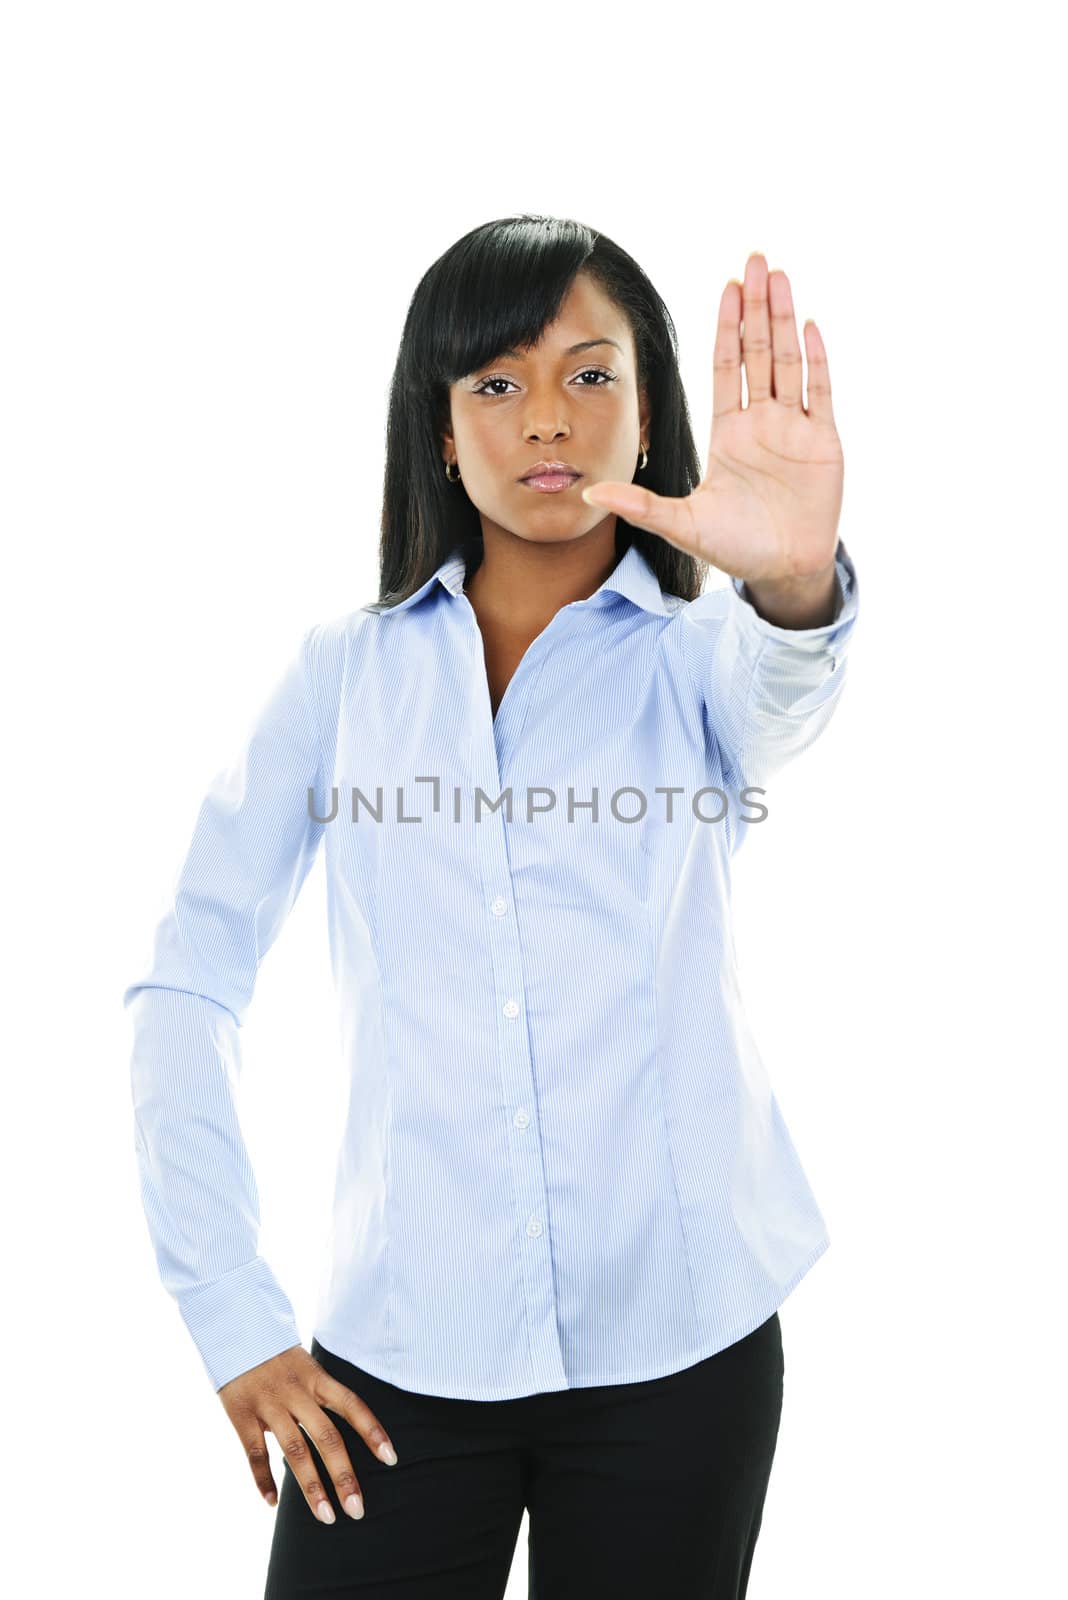 Serious black woman showing stop hand gesture isolated on white background